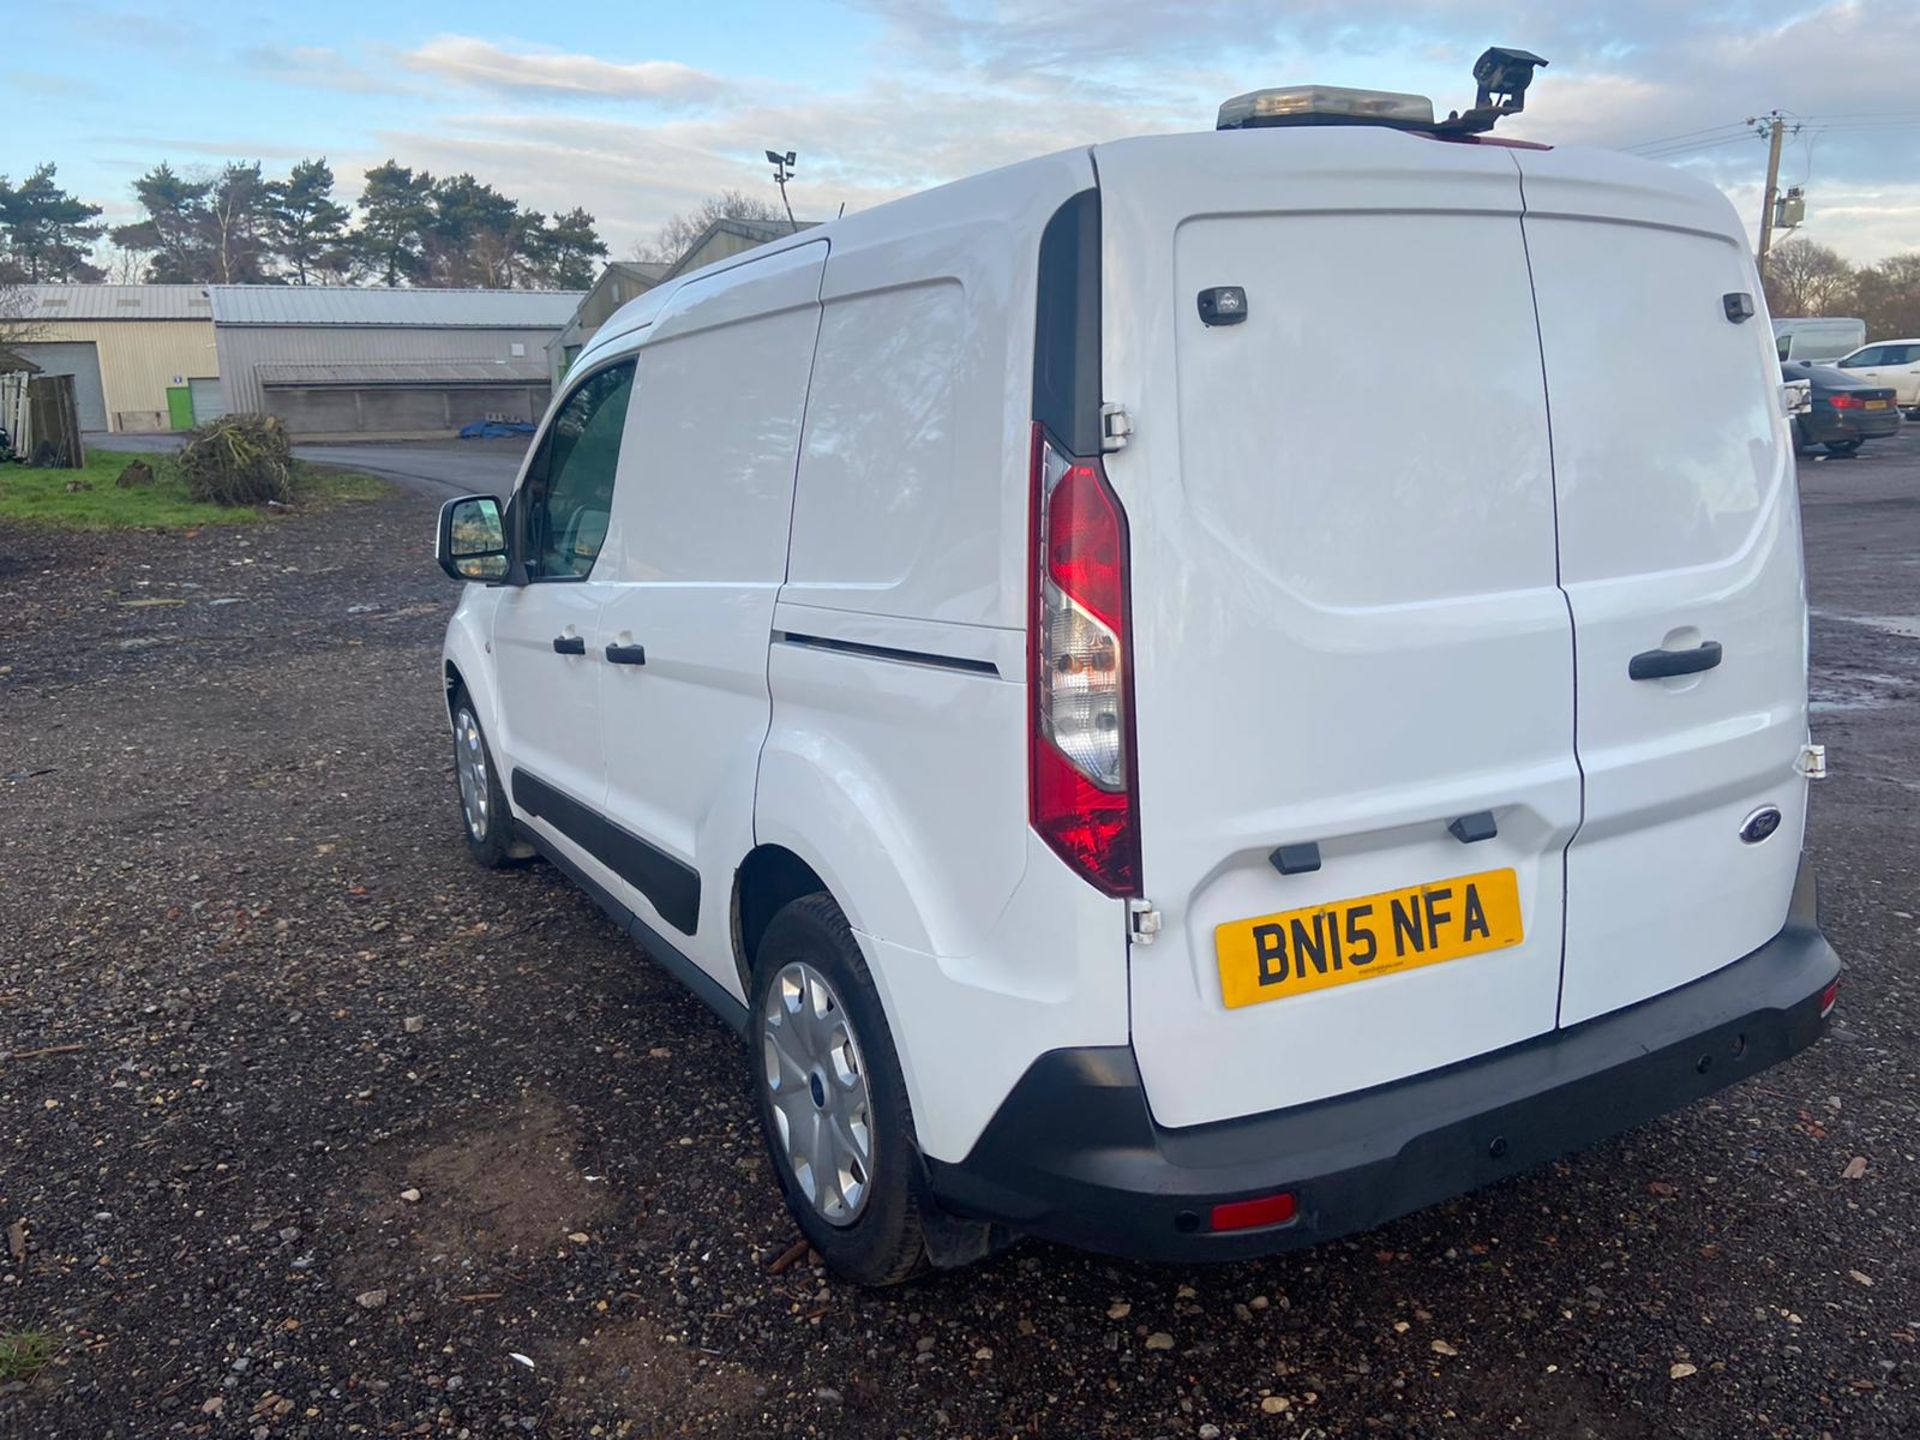 2015/15 REG FORD TRANSIT CONNECT 200 ECONETIC 1.6 DIESEL WHITE PANEL VAN, SHOWING 0 FORMER KEEPERS - Image 5 of 11